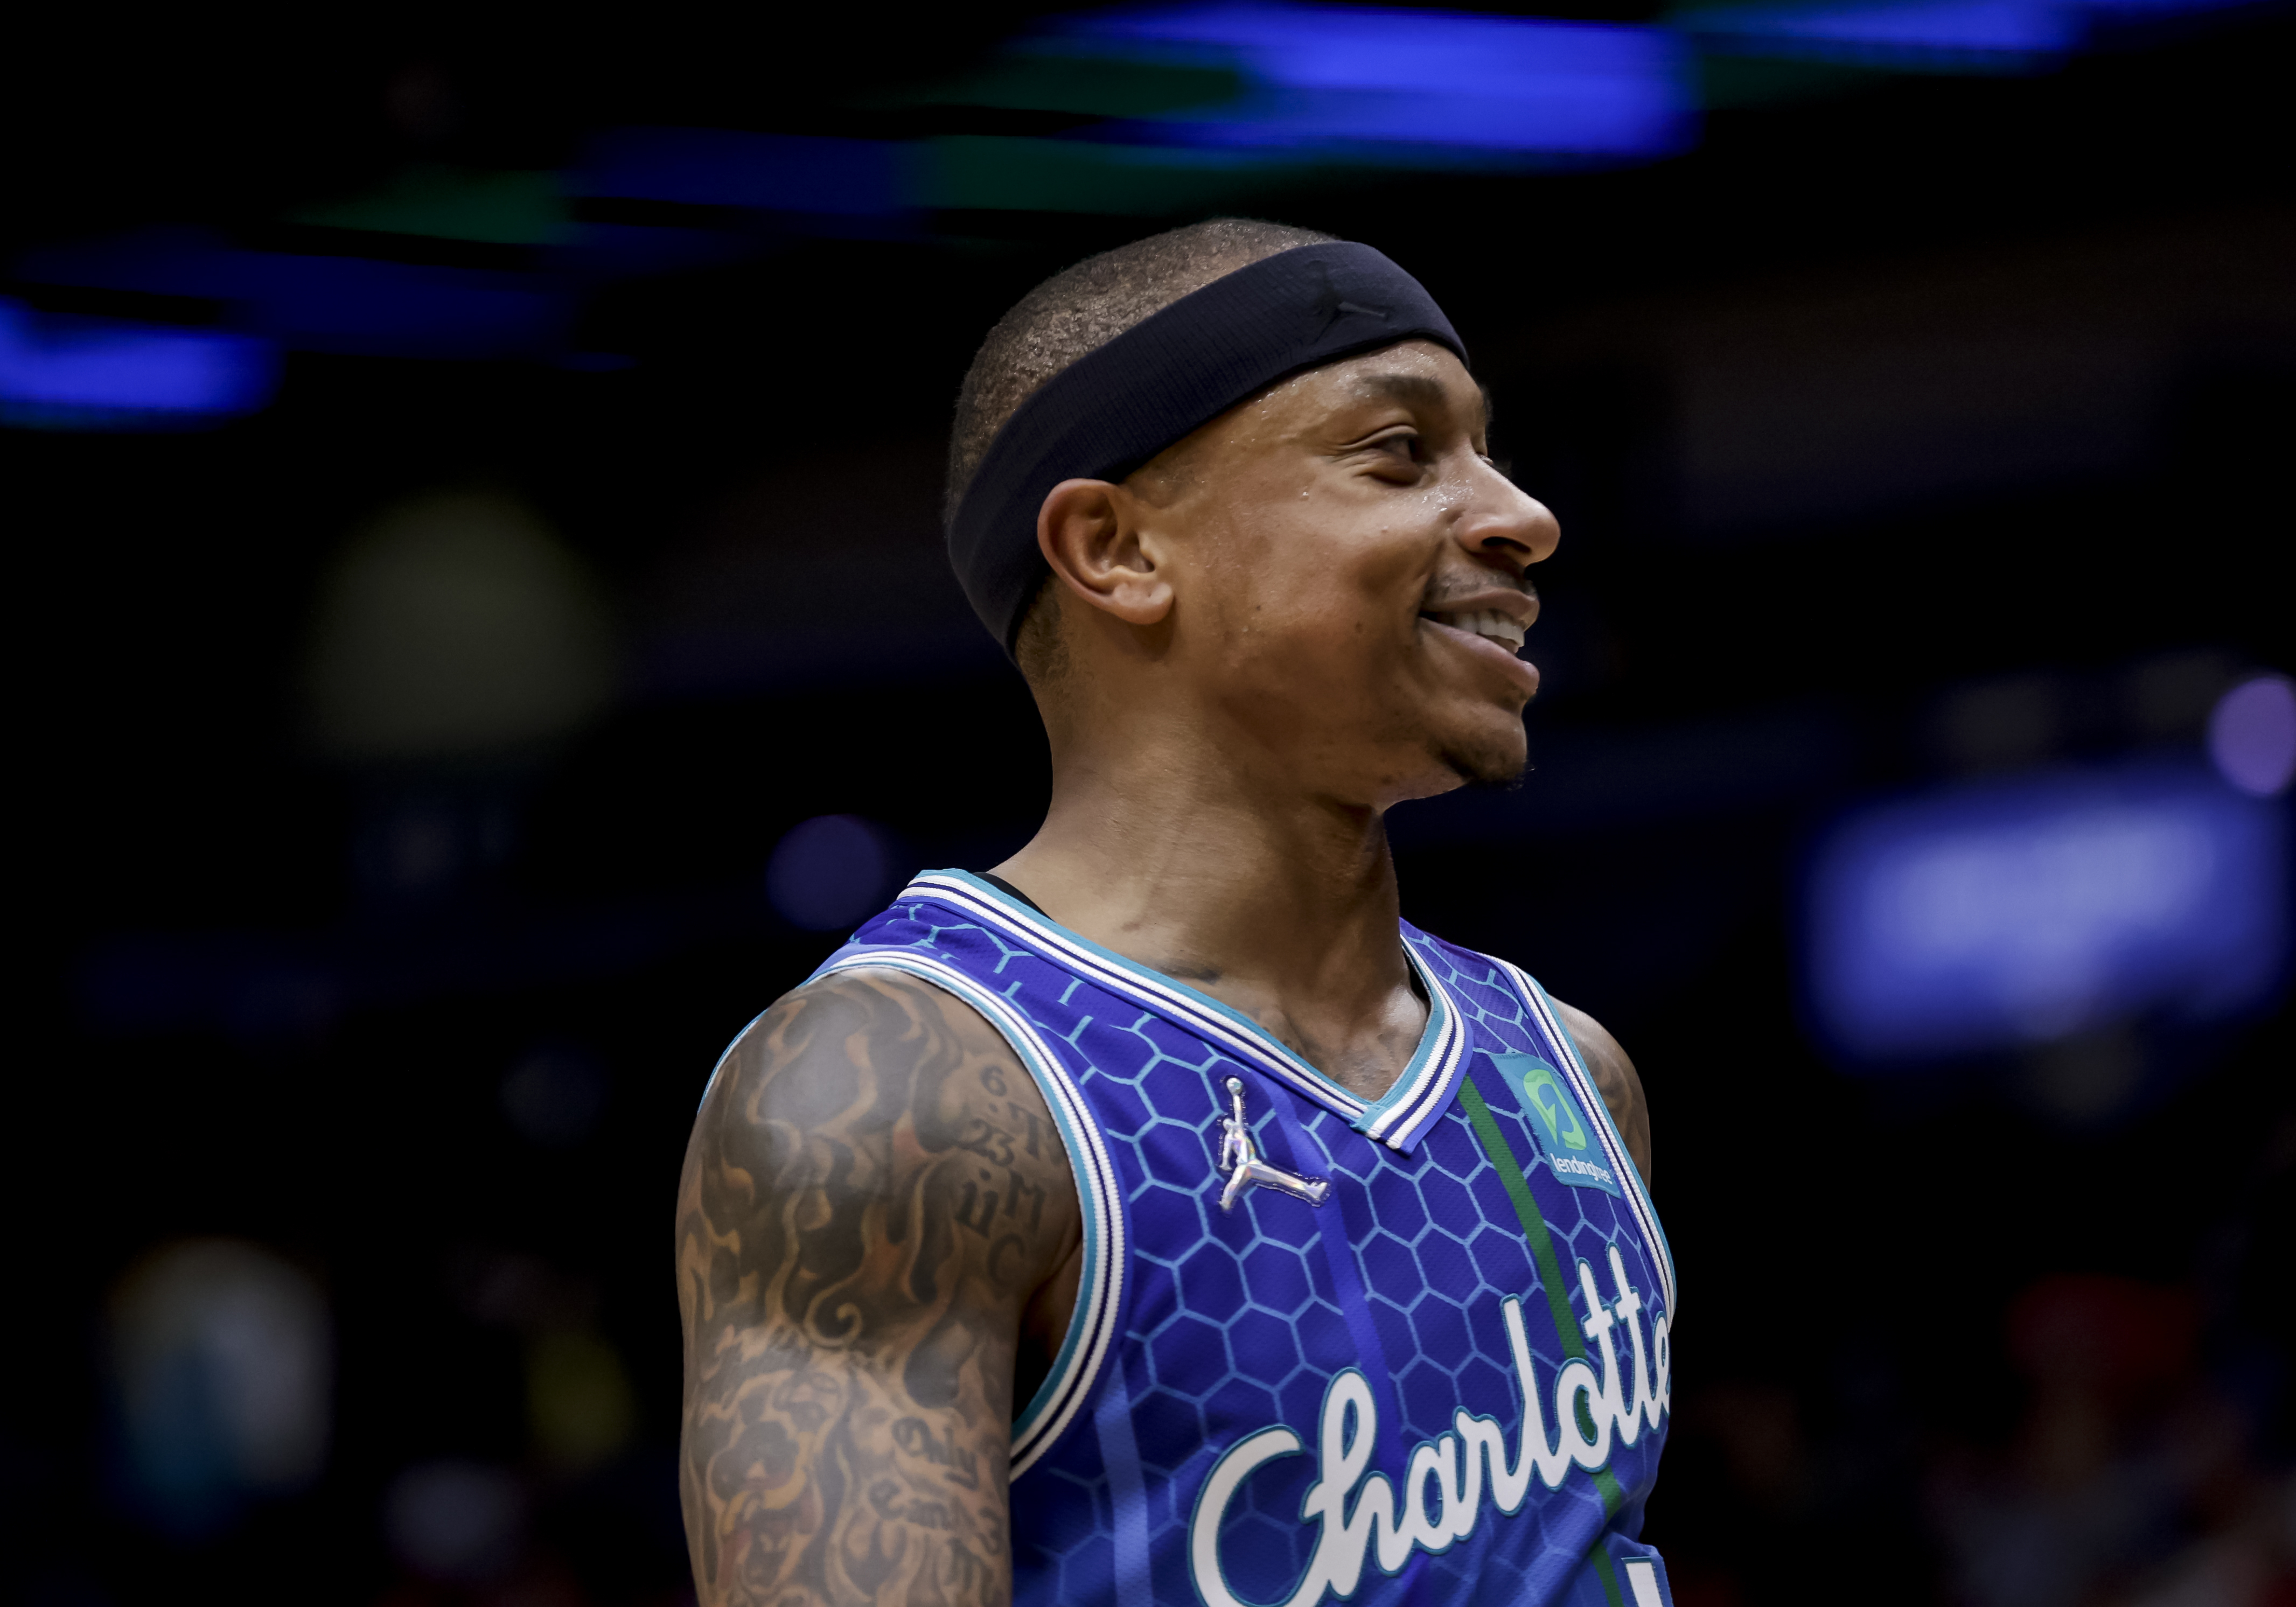 Here's how Isaiah Thomas did in his Lakers debut - The Boston Globe